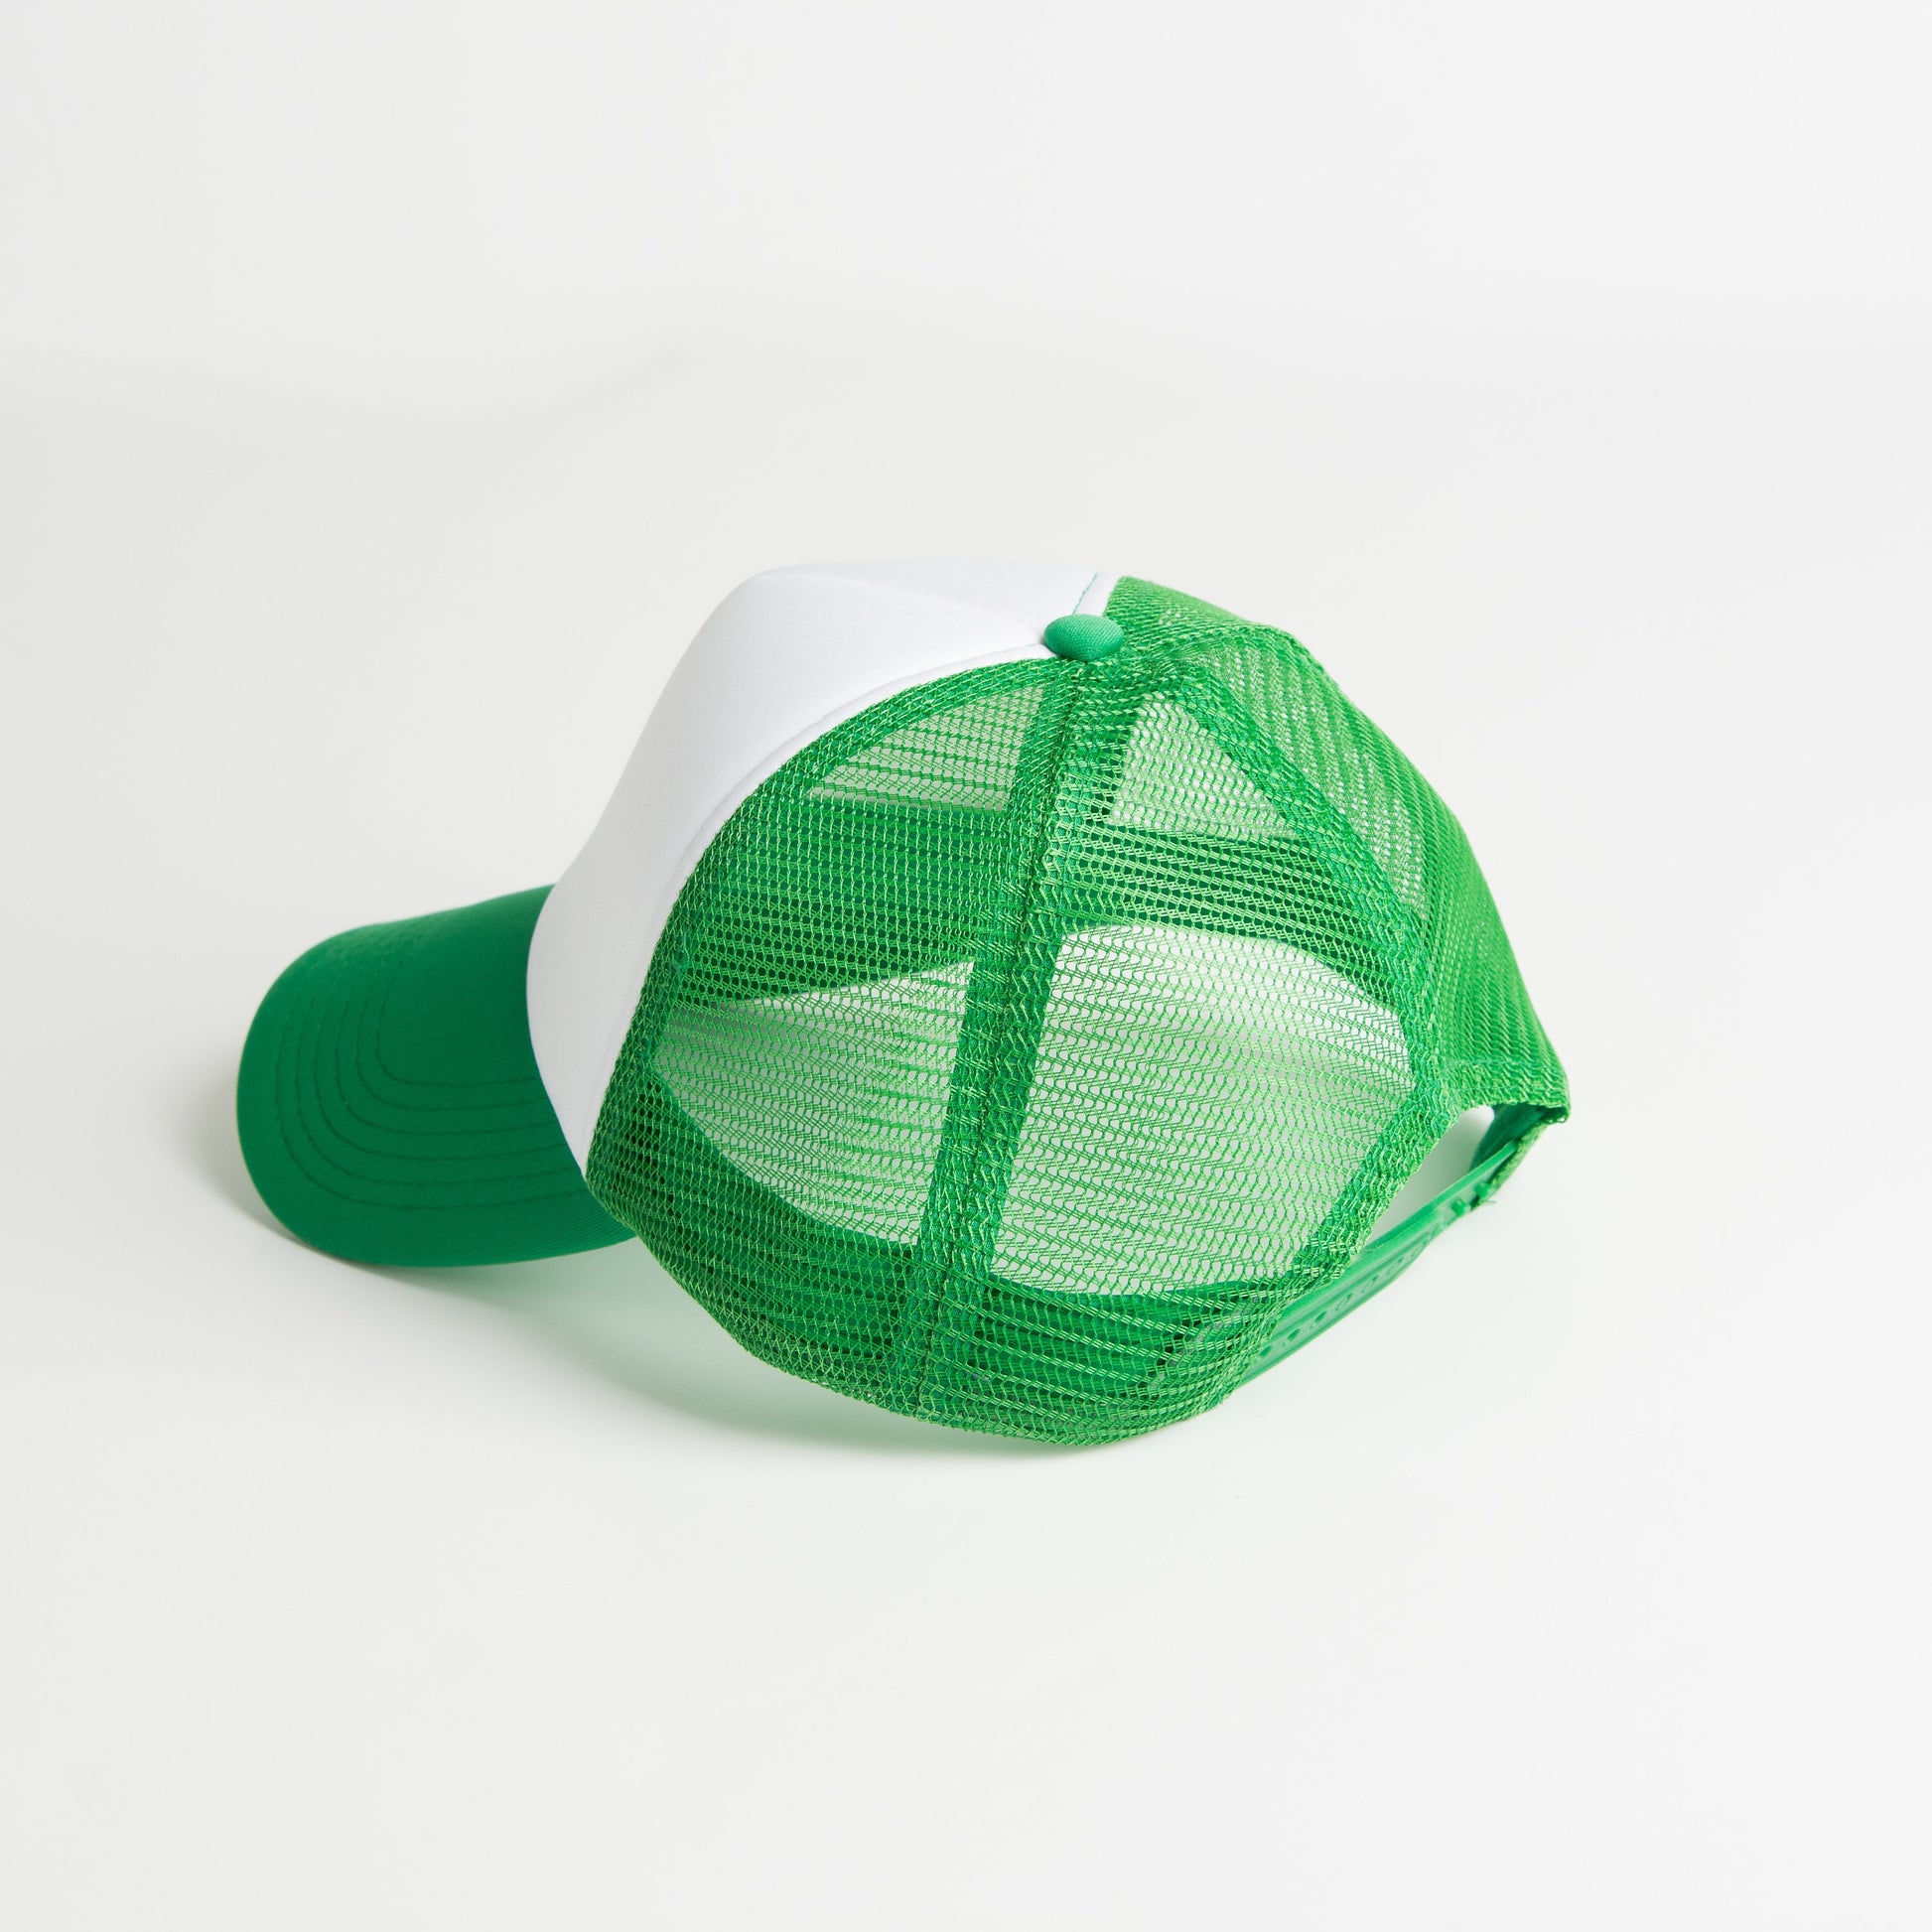 a green and white trucker hat on a white background